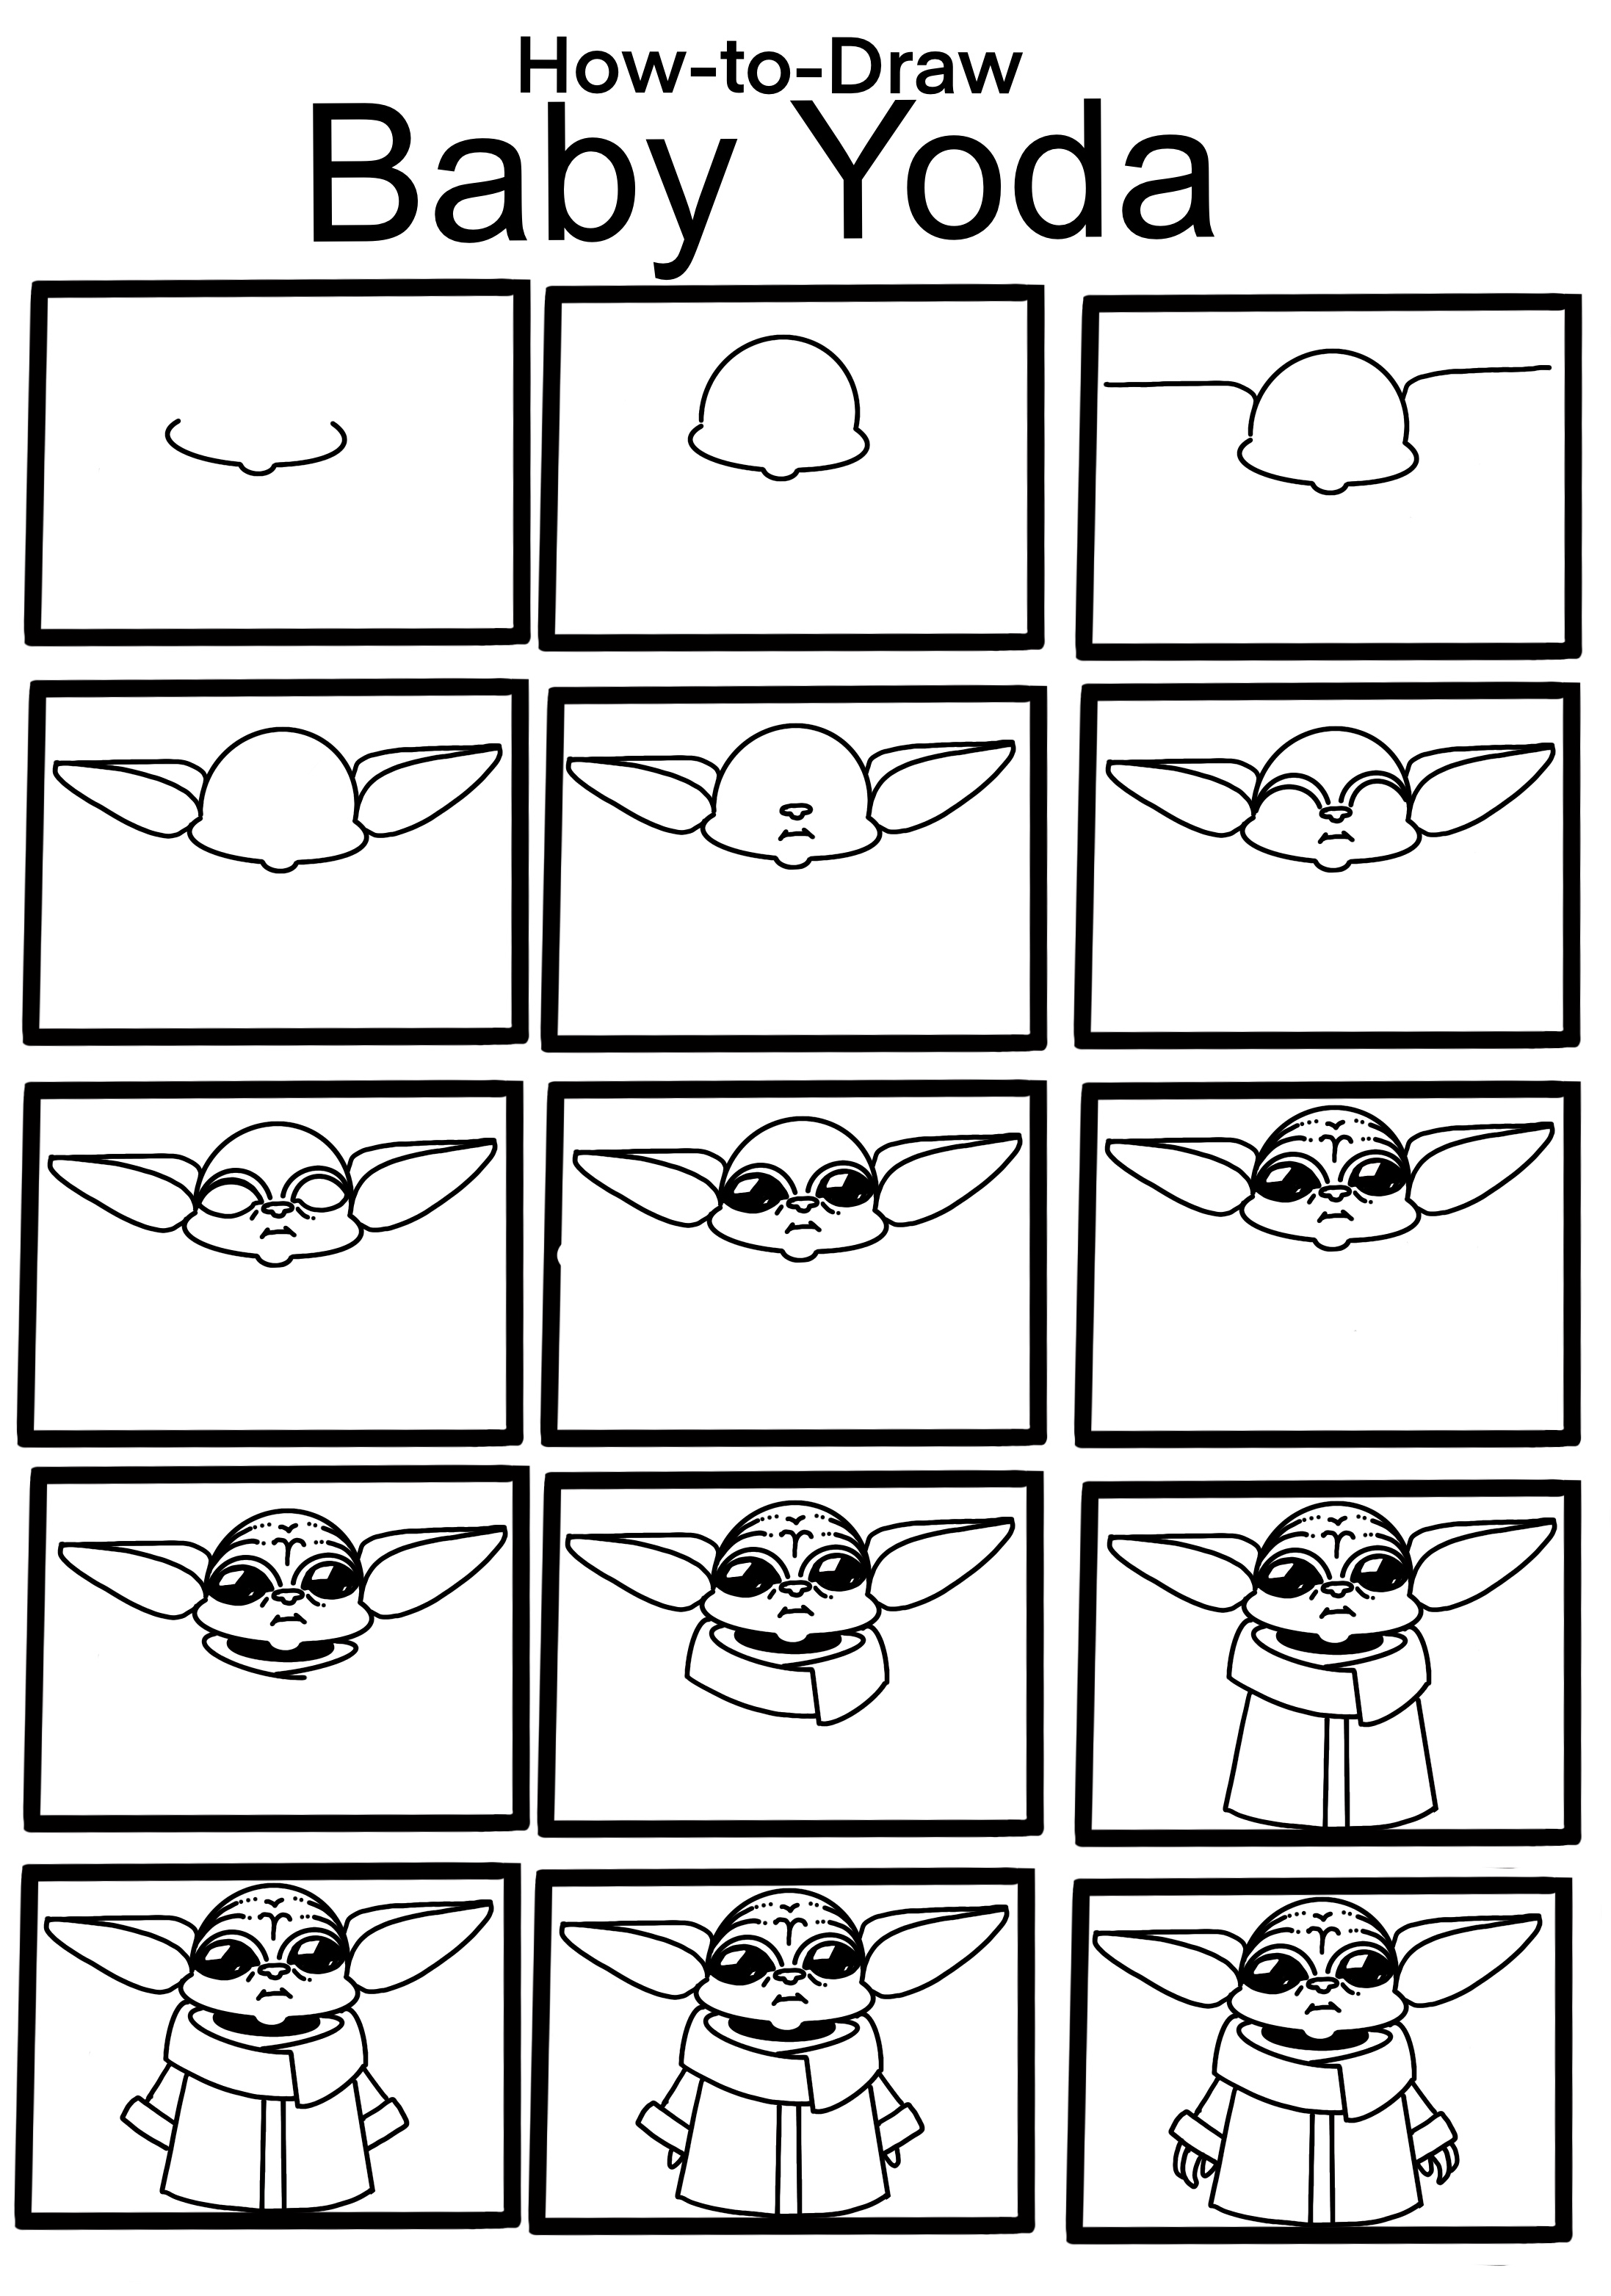 How to draw Baby Yoda (The Child)